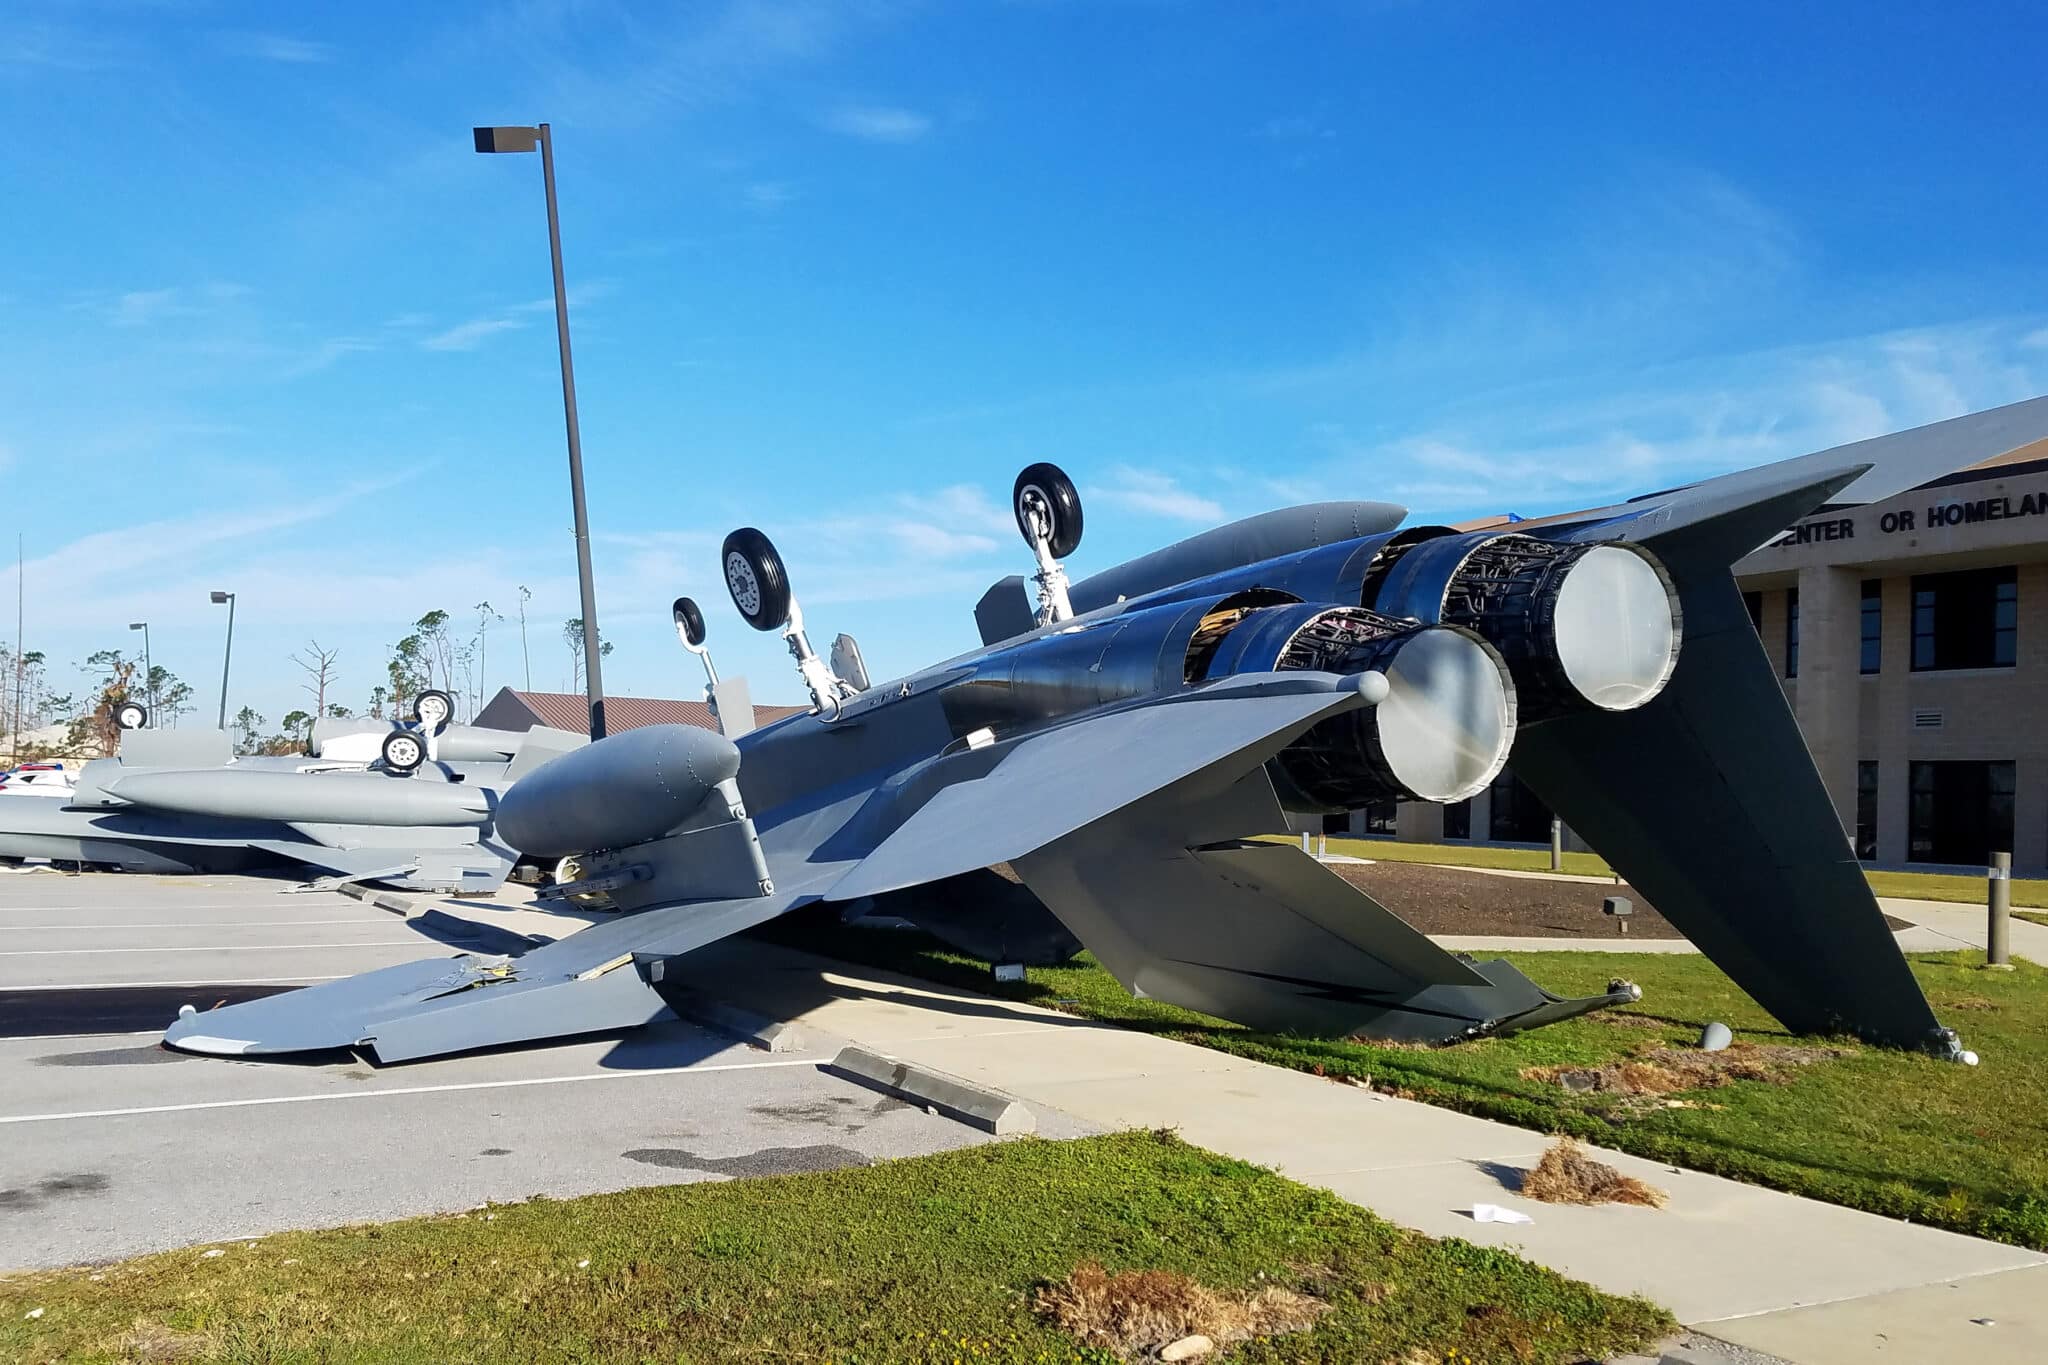 Two fighter jets flipped over in a parking lot after a storm